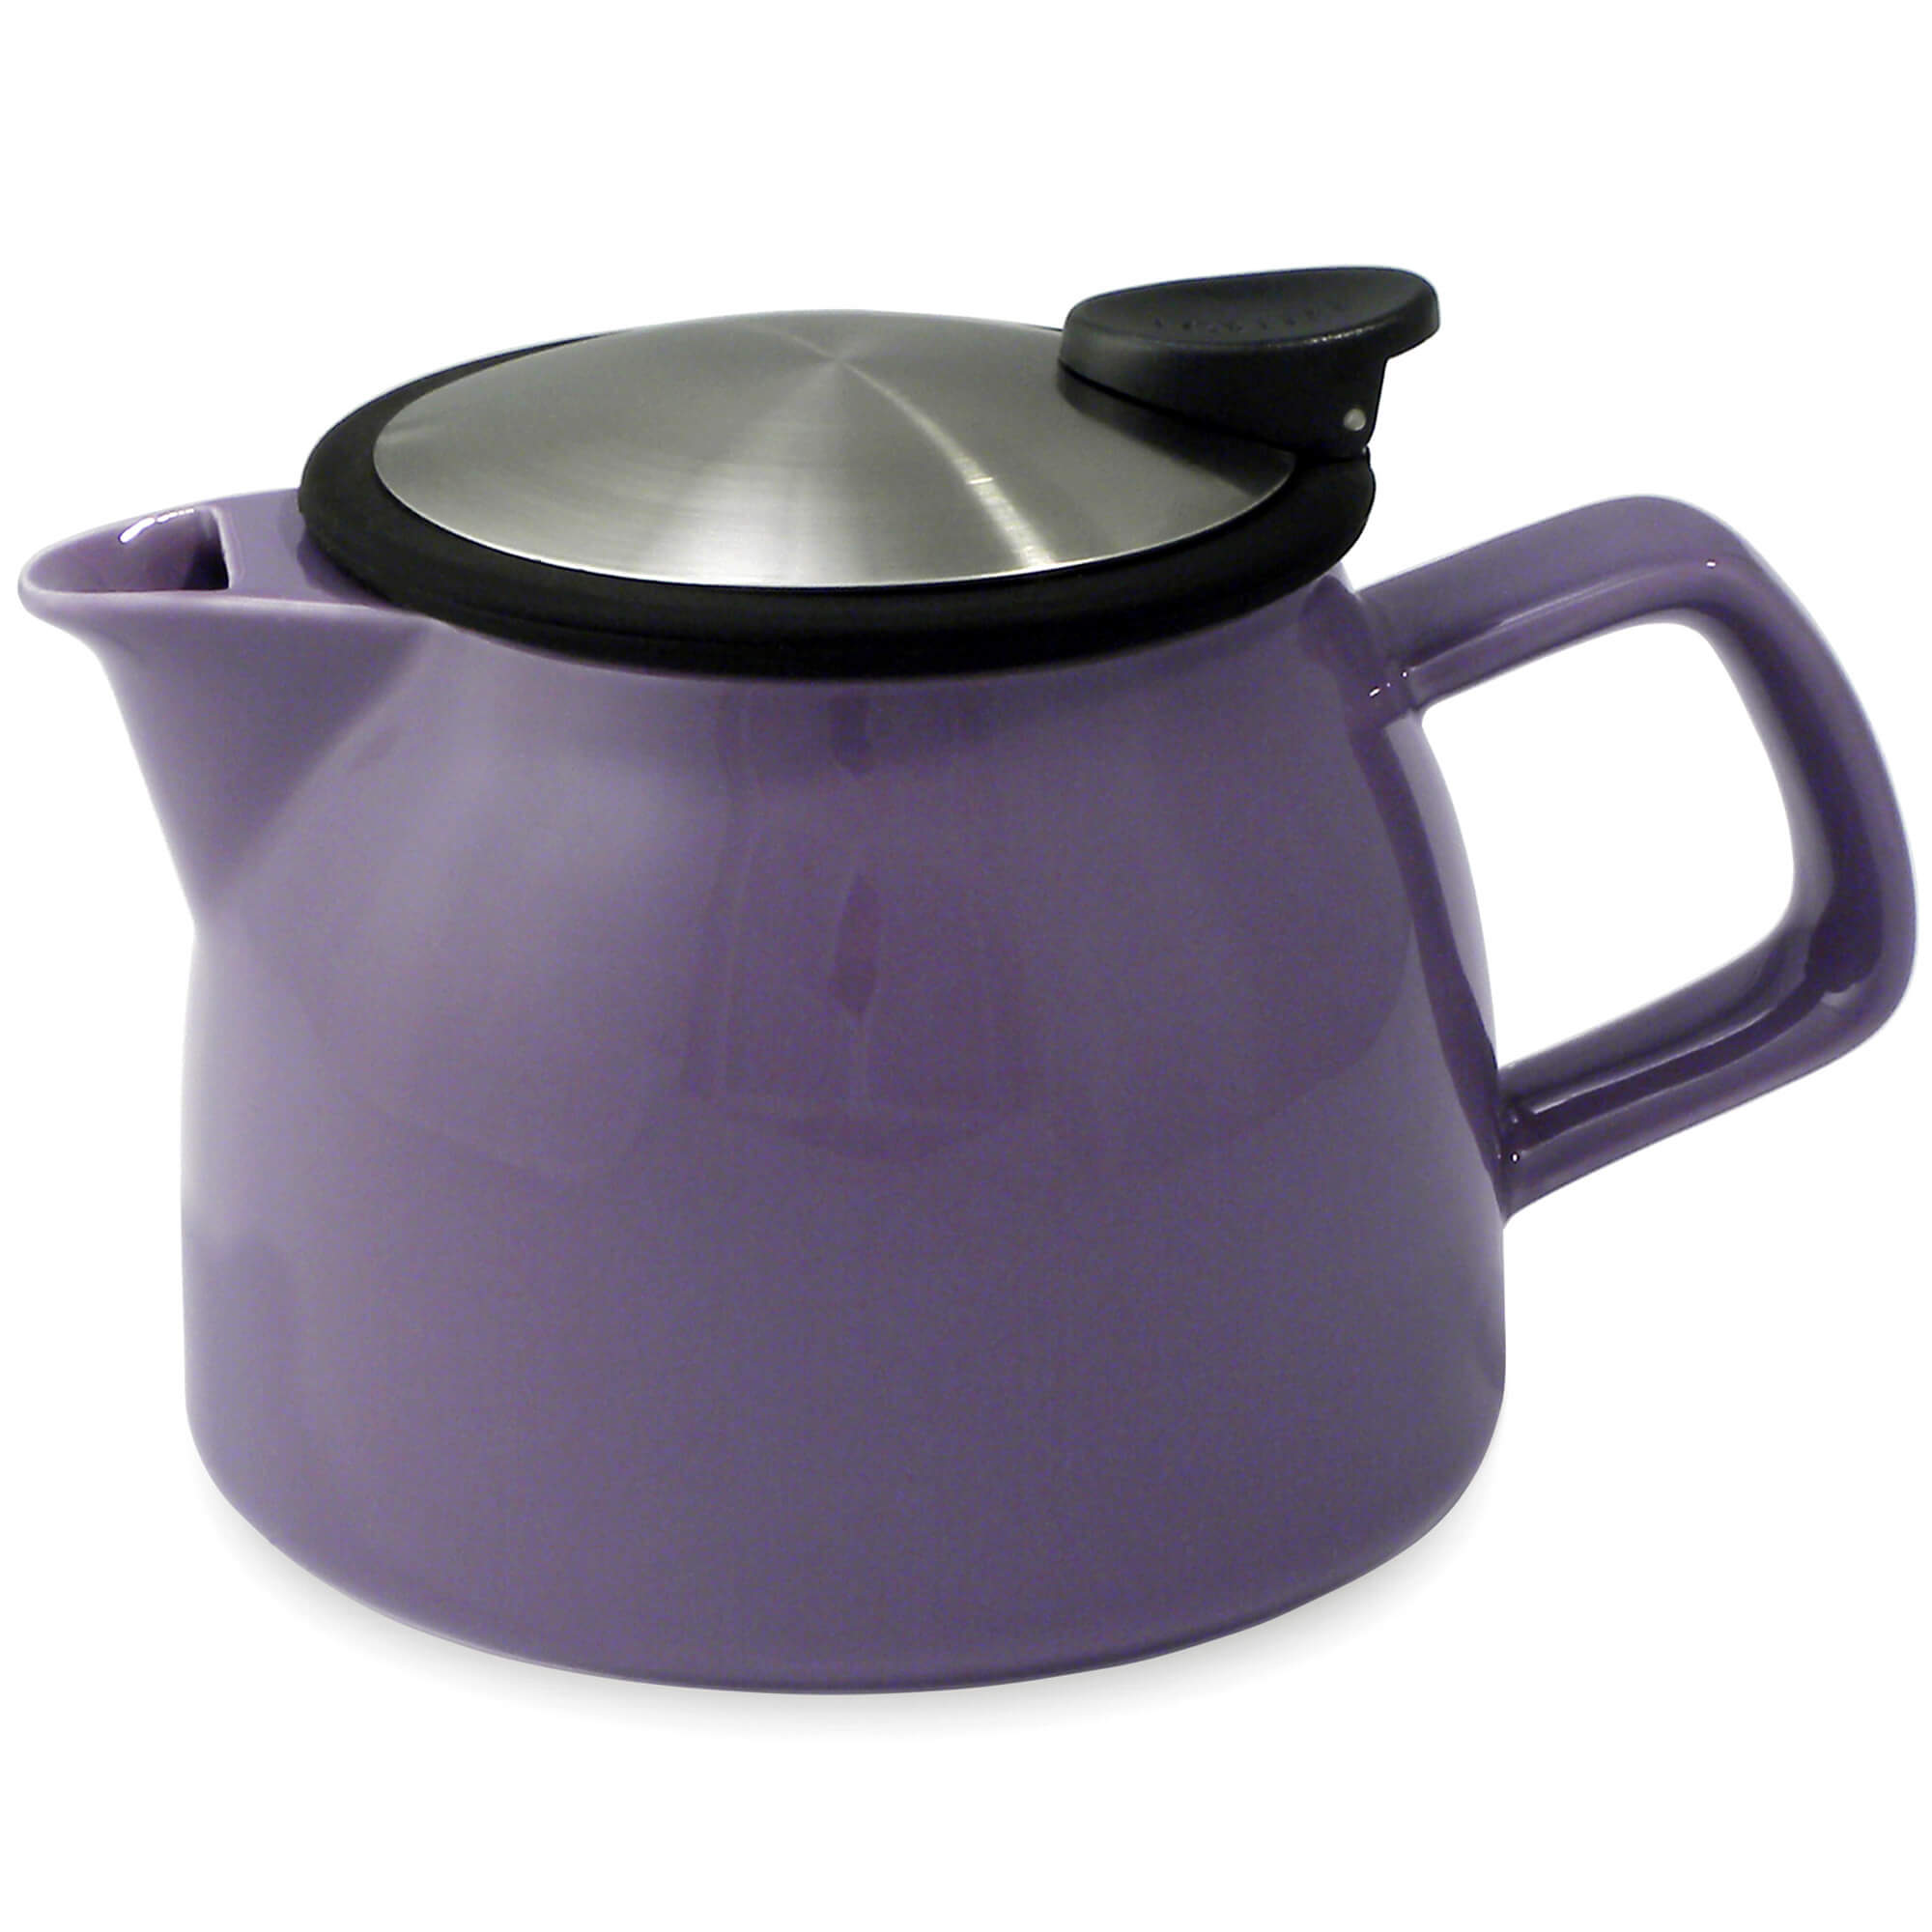 16 Ounce Bell Ceramic Teapot from FORLIFE (two colors)